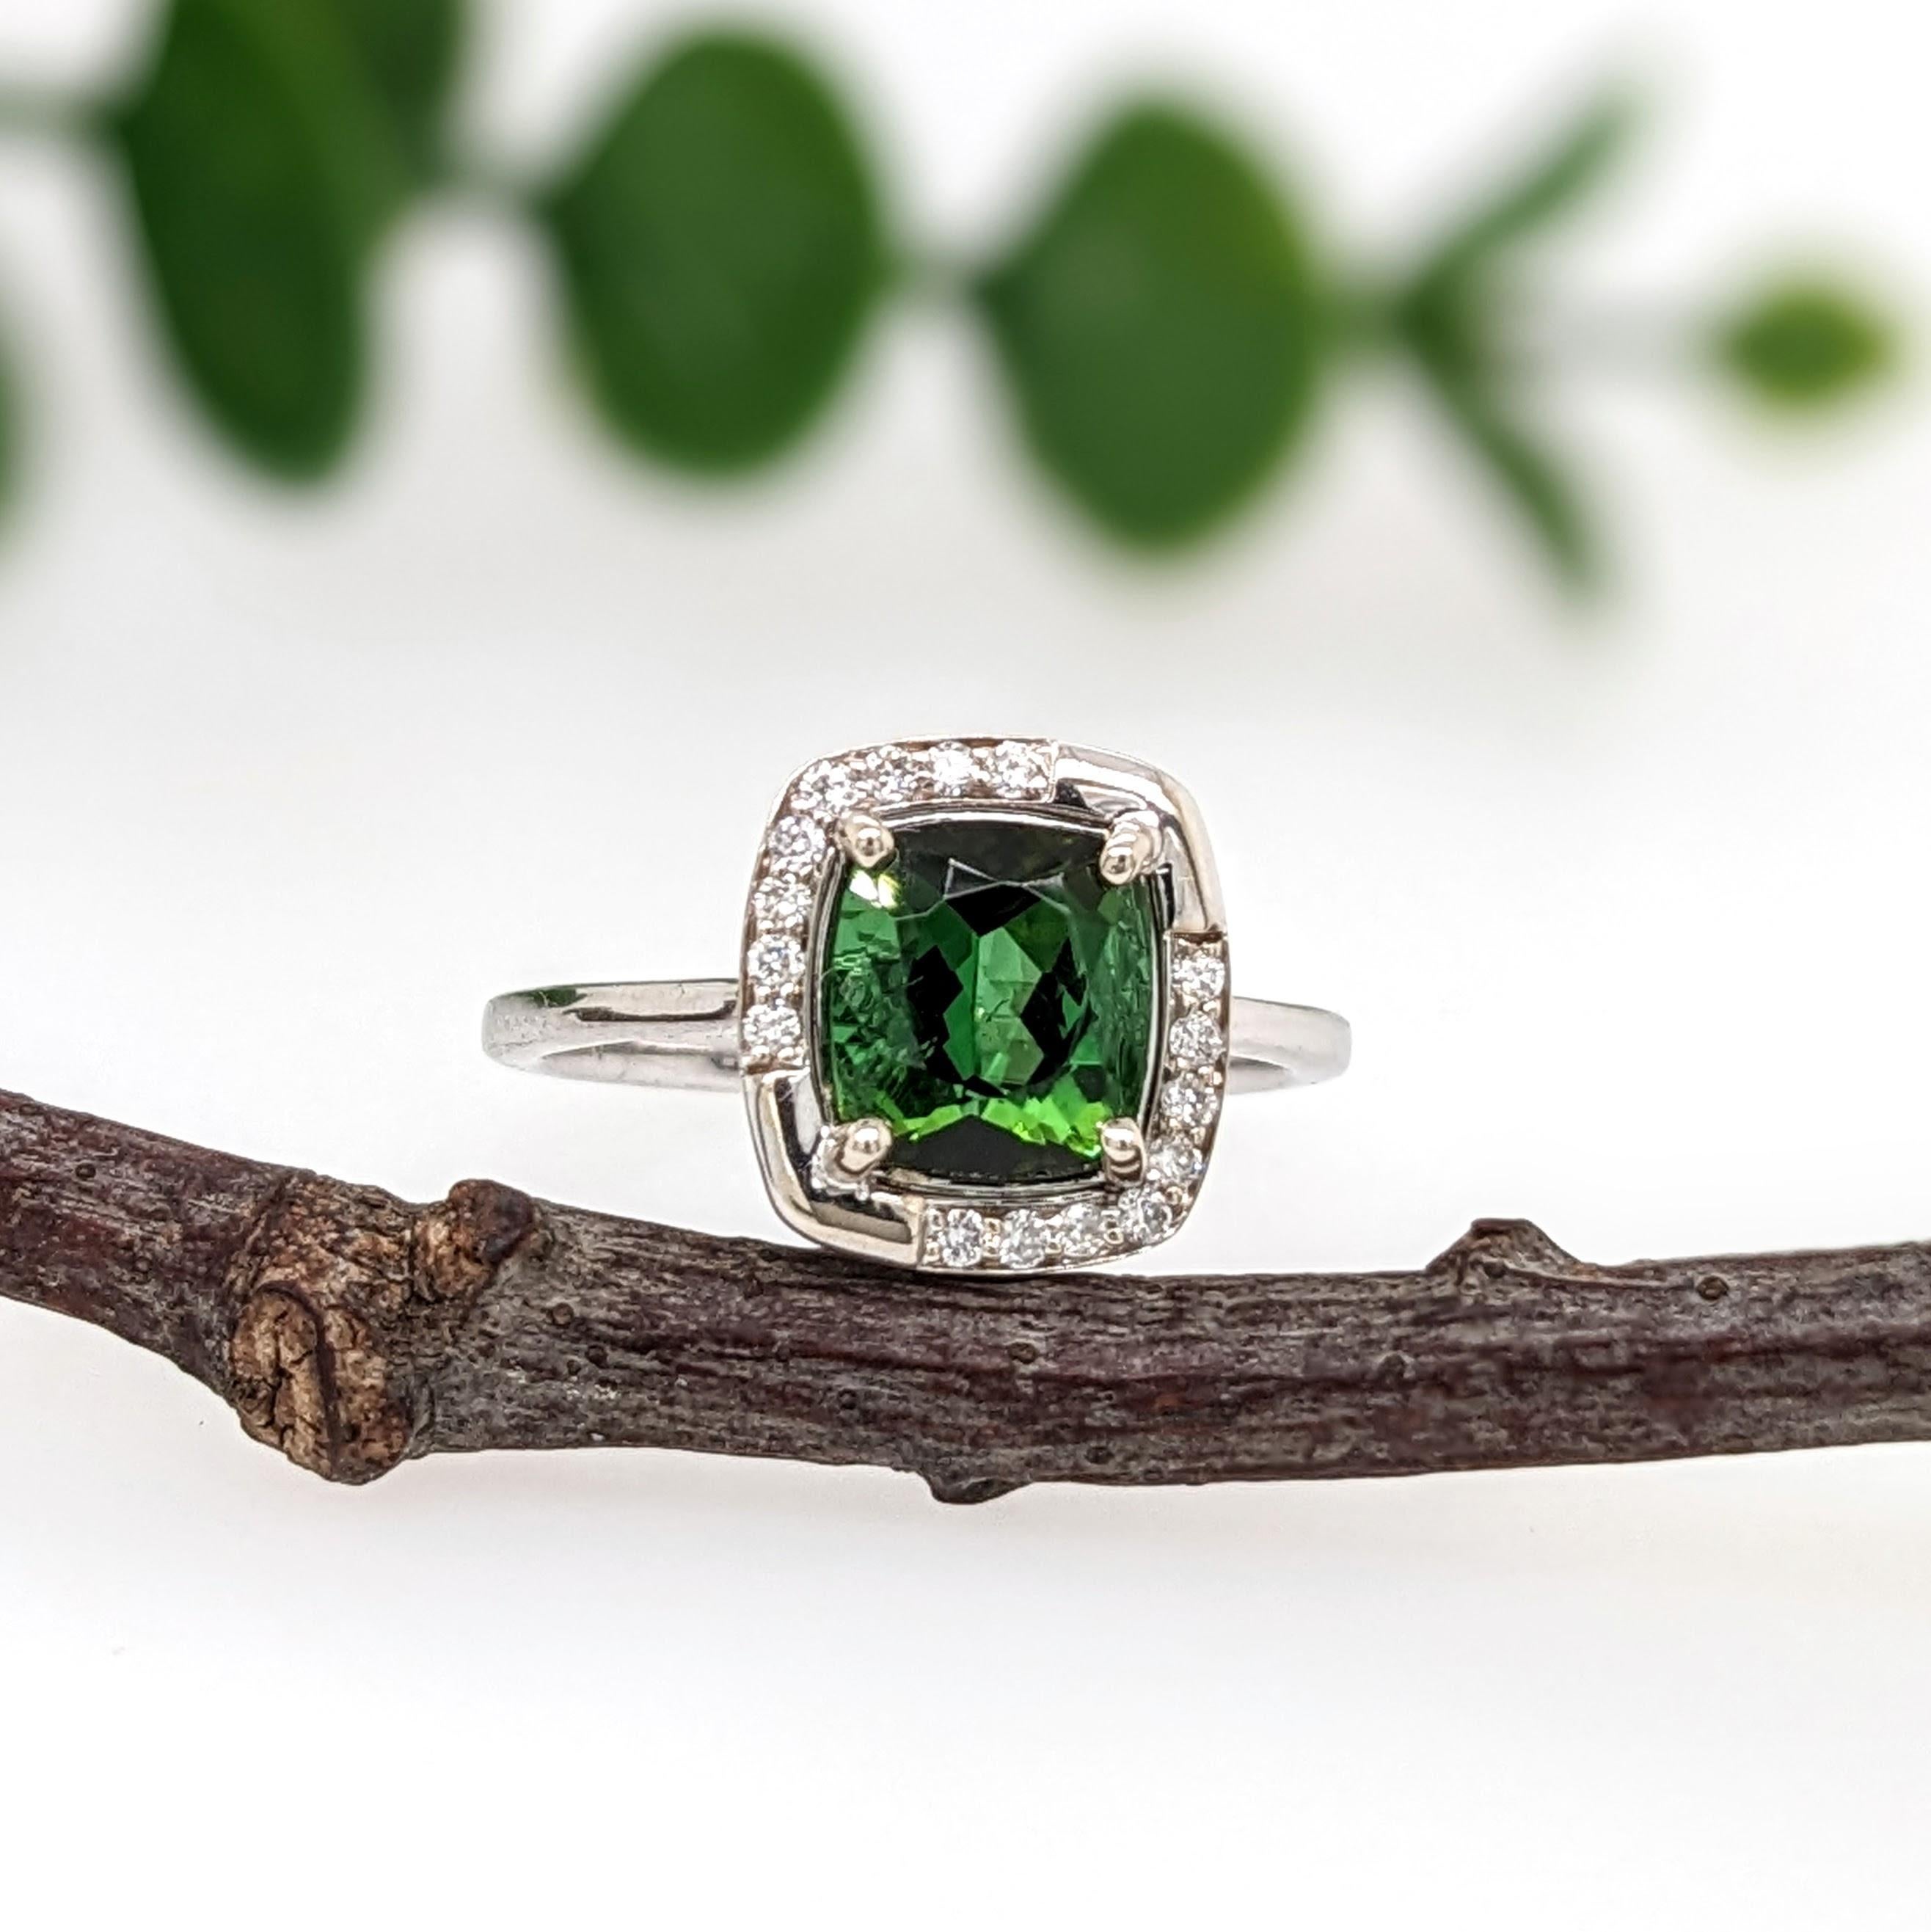 A vivid chrome tourmaline looks exquisite in this elegant ring with a diamond halo. A statement ring design perfect for an eye catching engagement or anniversary. This ring also makes a beautiful October birthstone ring for your loved